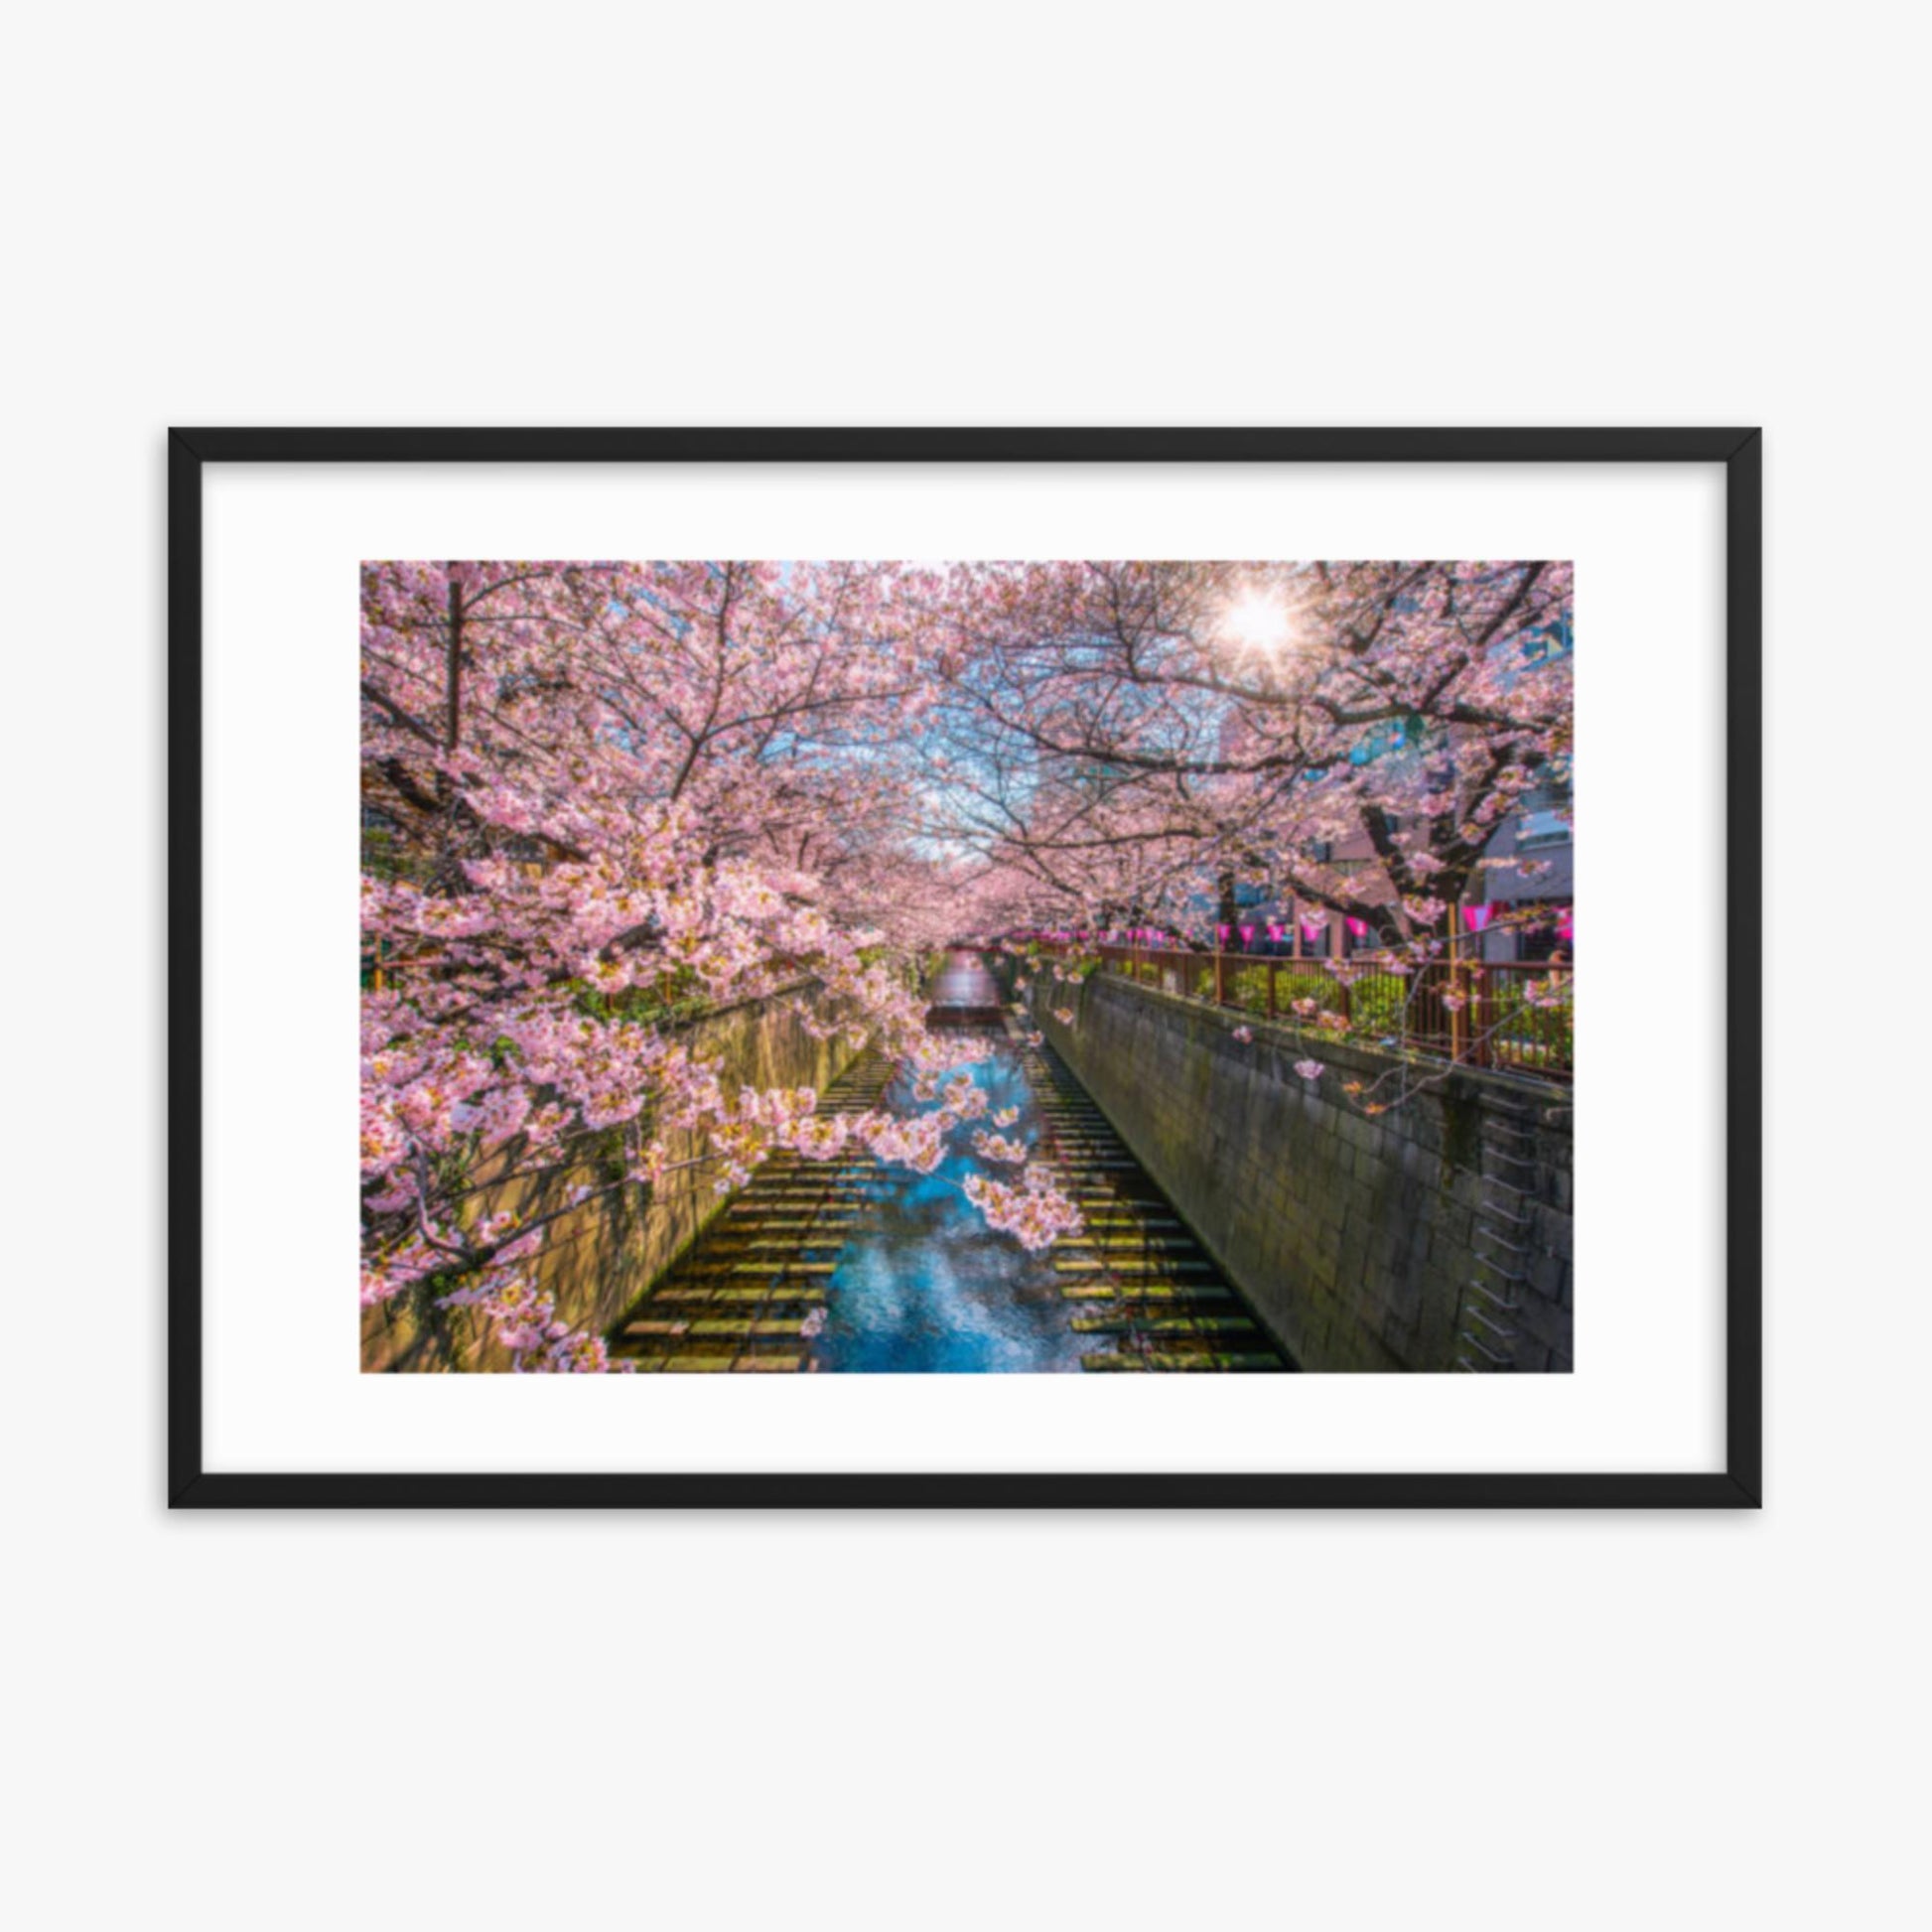 Cherry blossom sakura lined Meguro Canal in Tokyo 24x36 in Poster With Black Frame